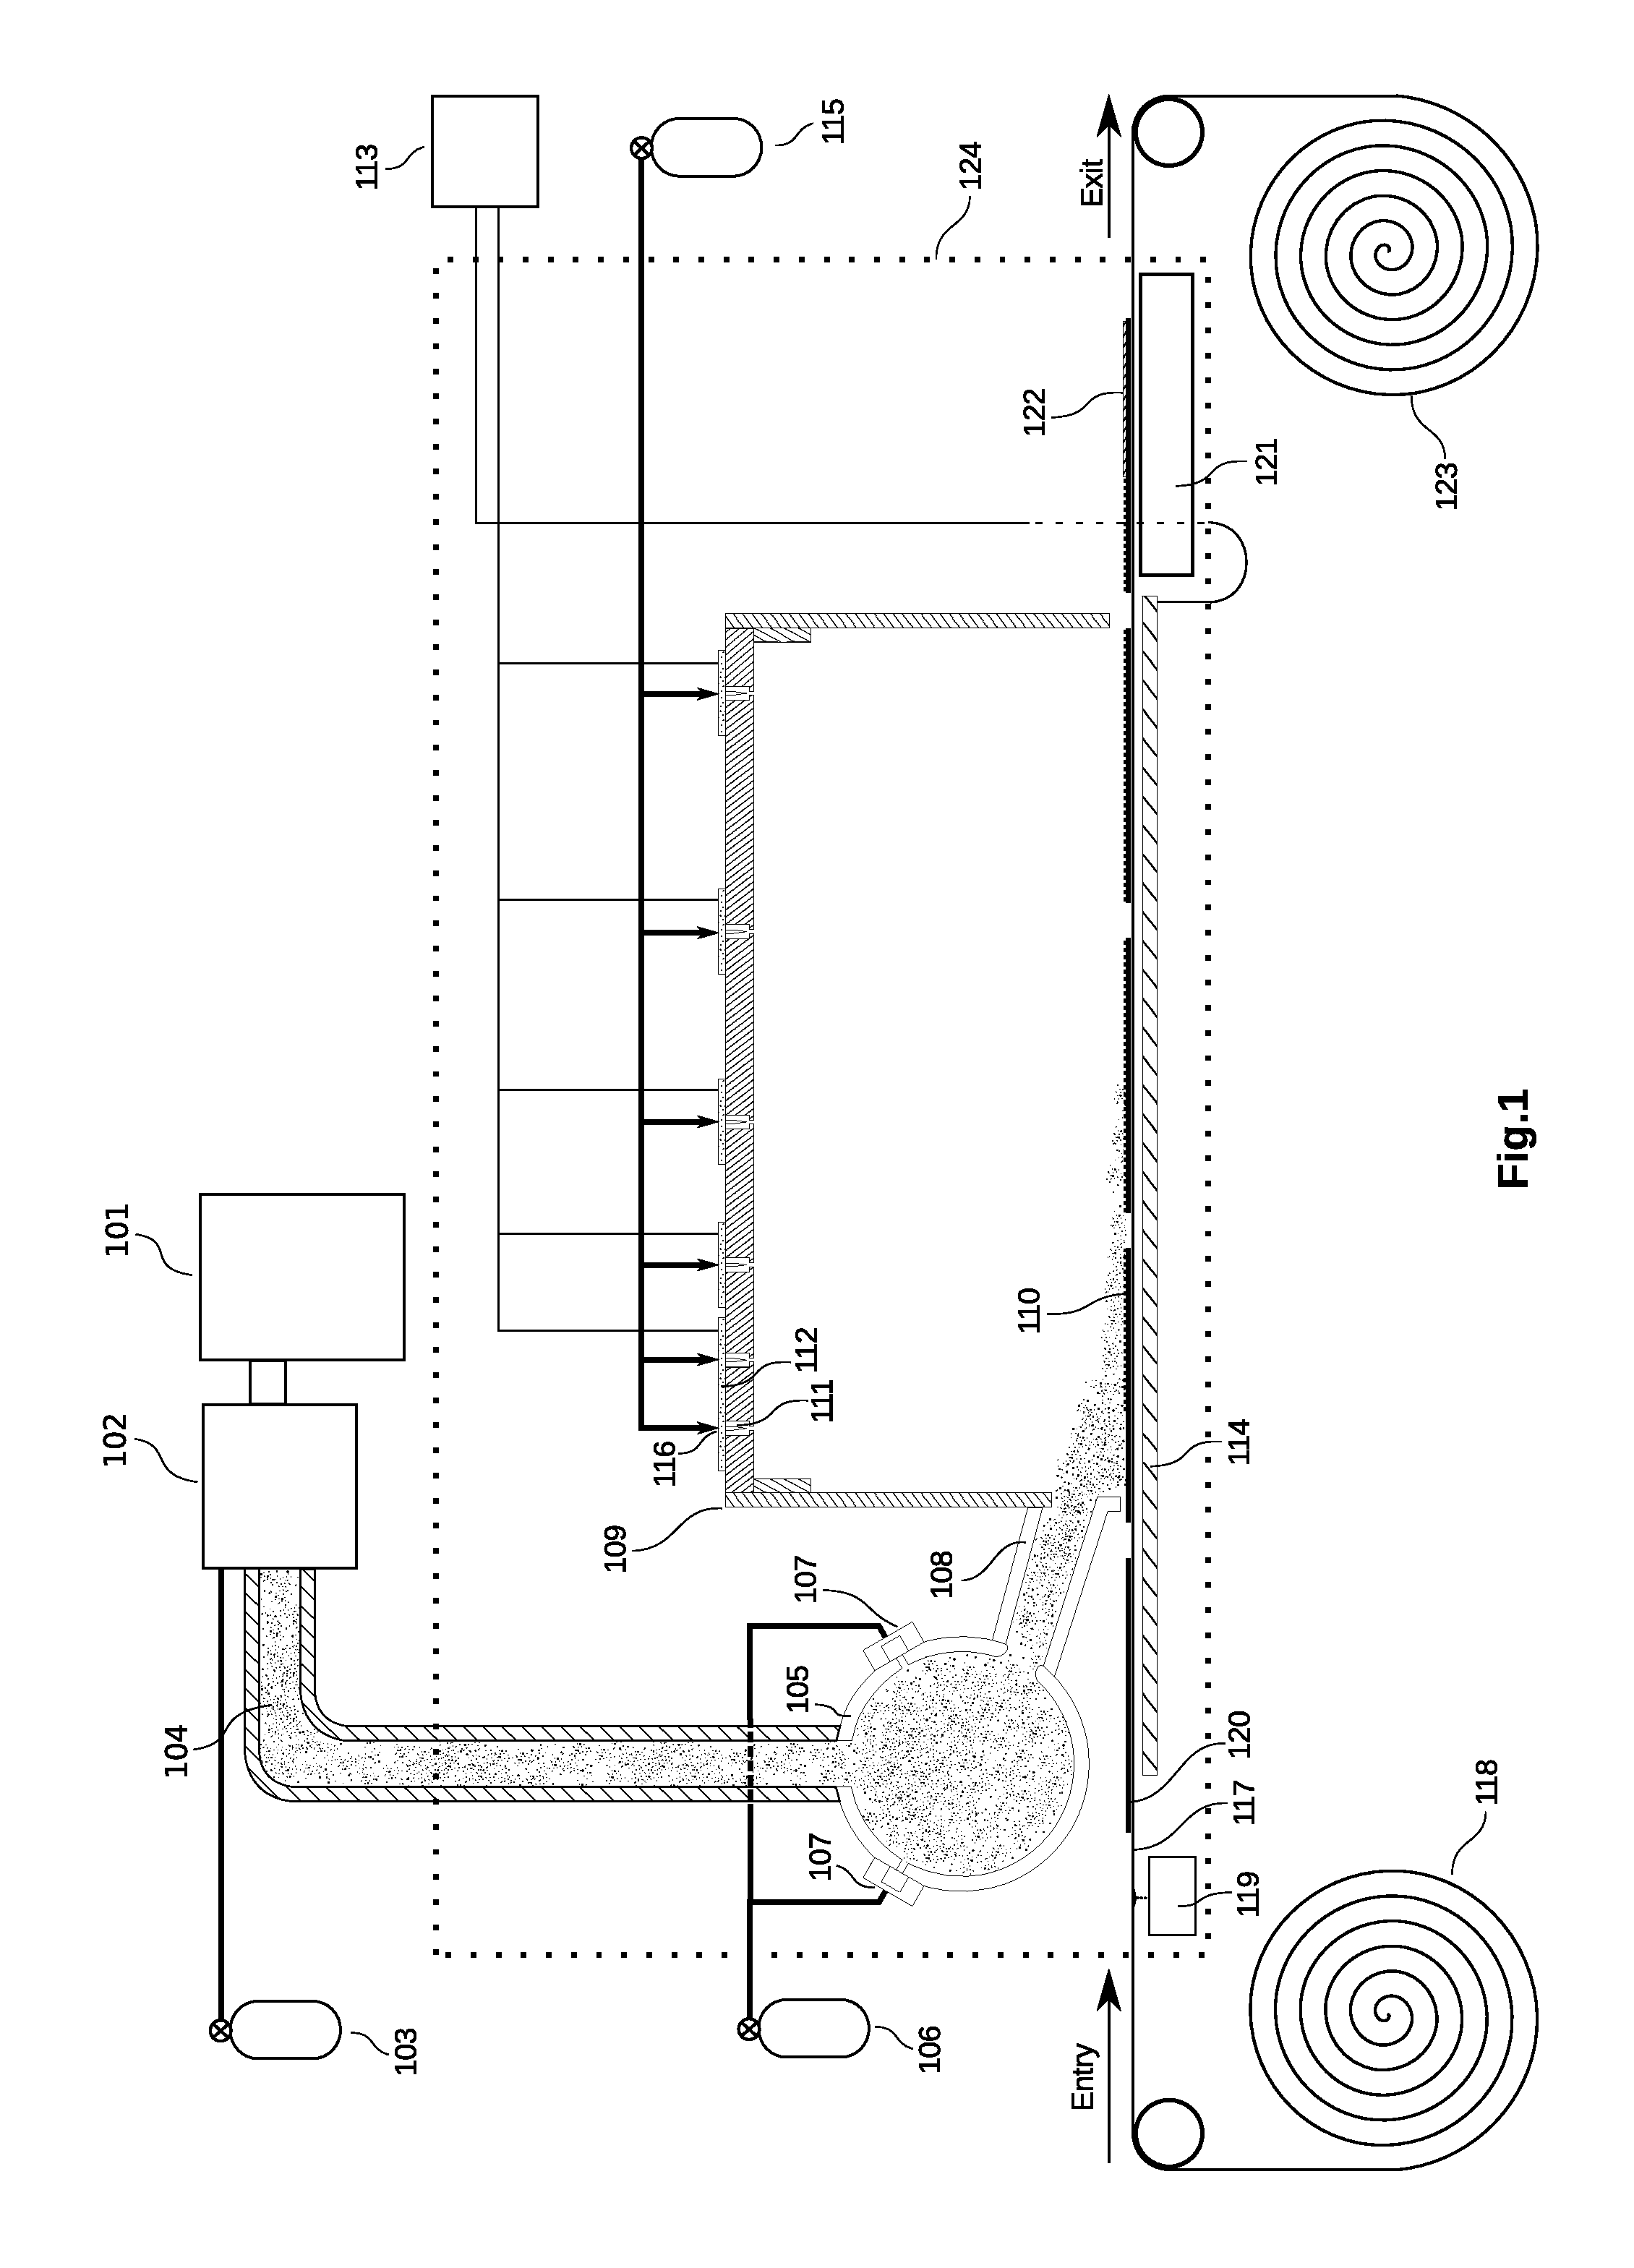 Apparatus and Process for Depositing a Thin Layer of Resist on a Substrate